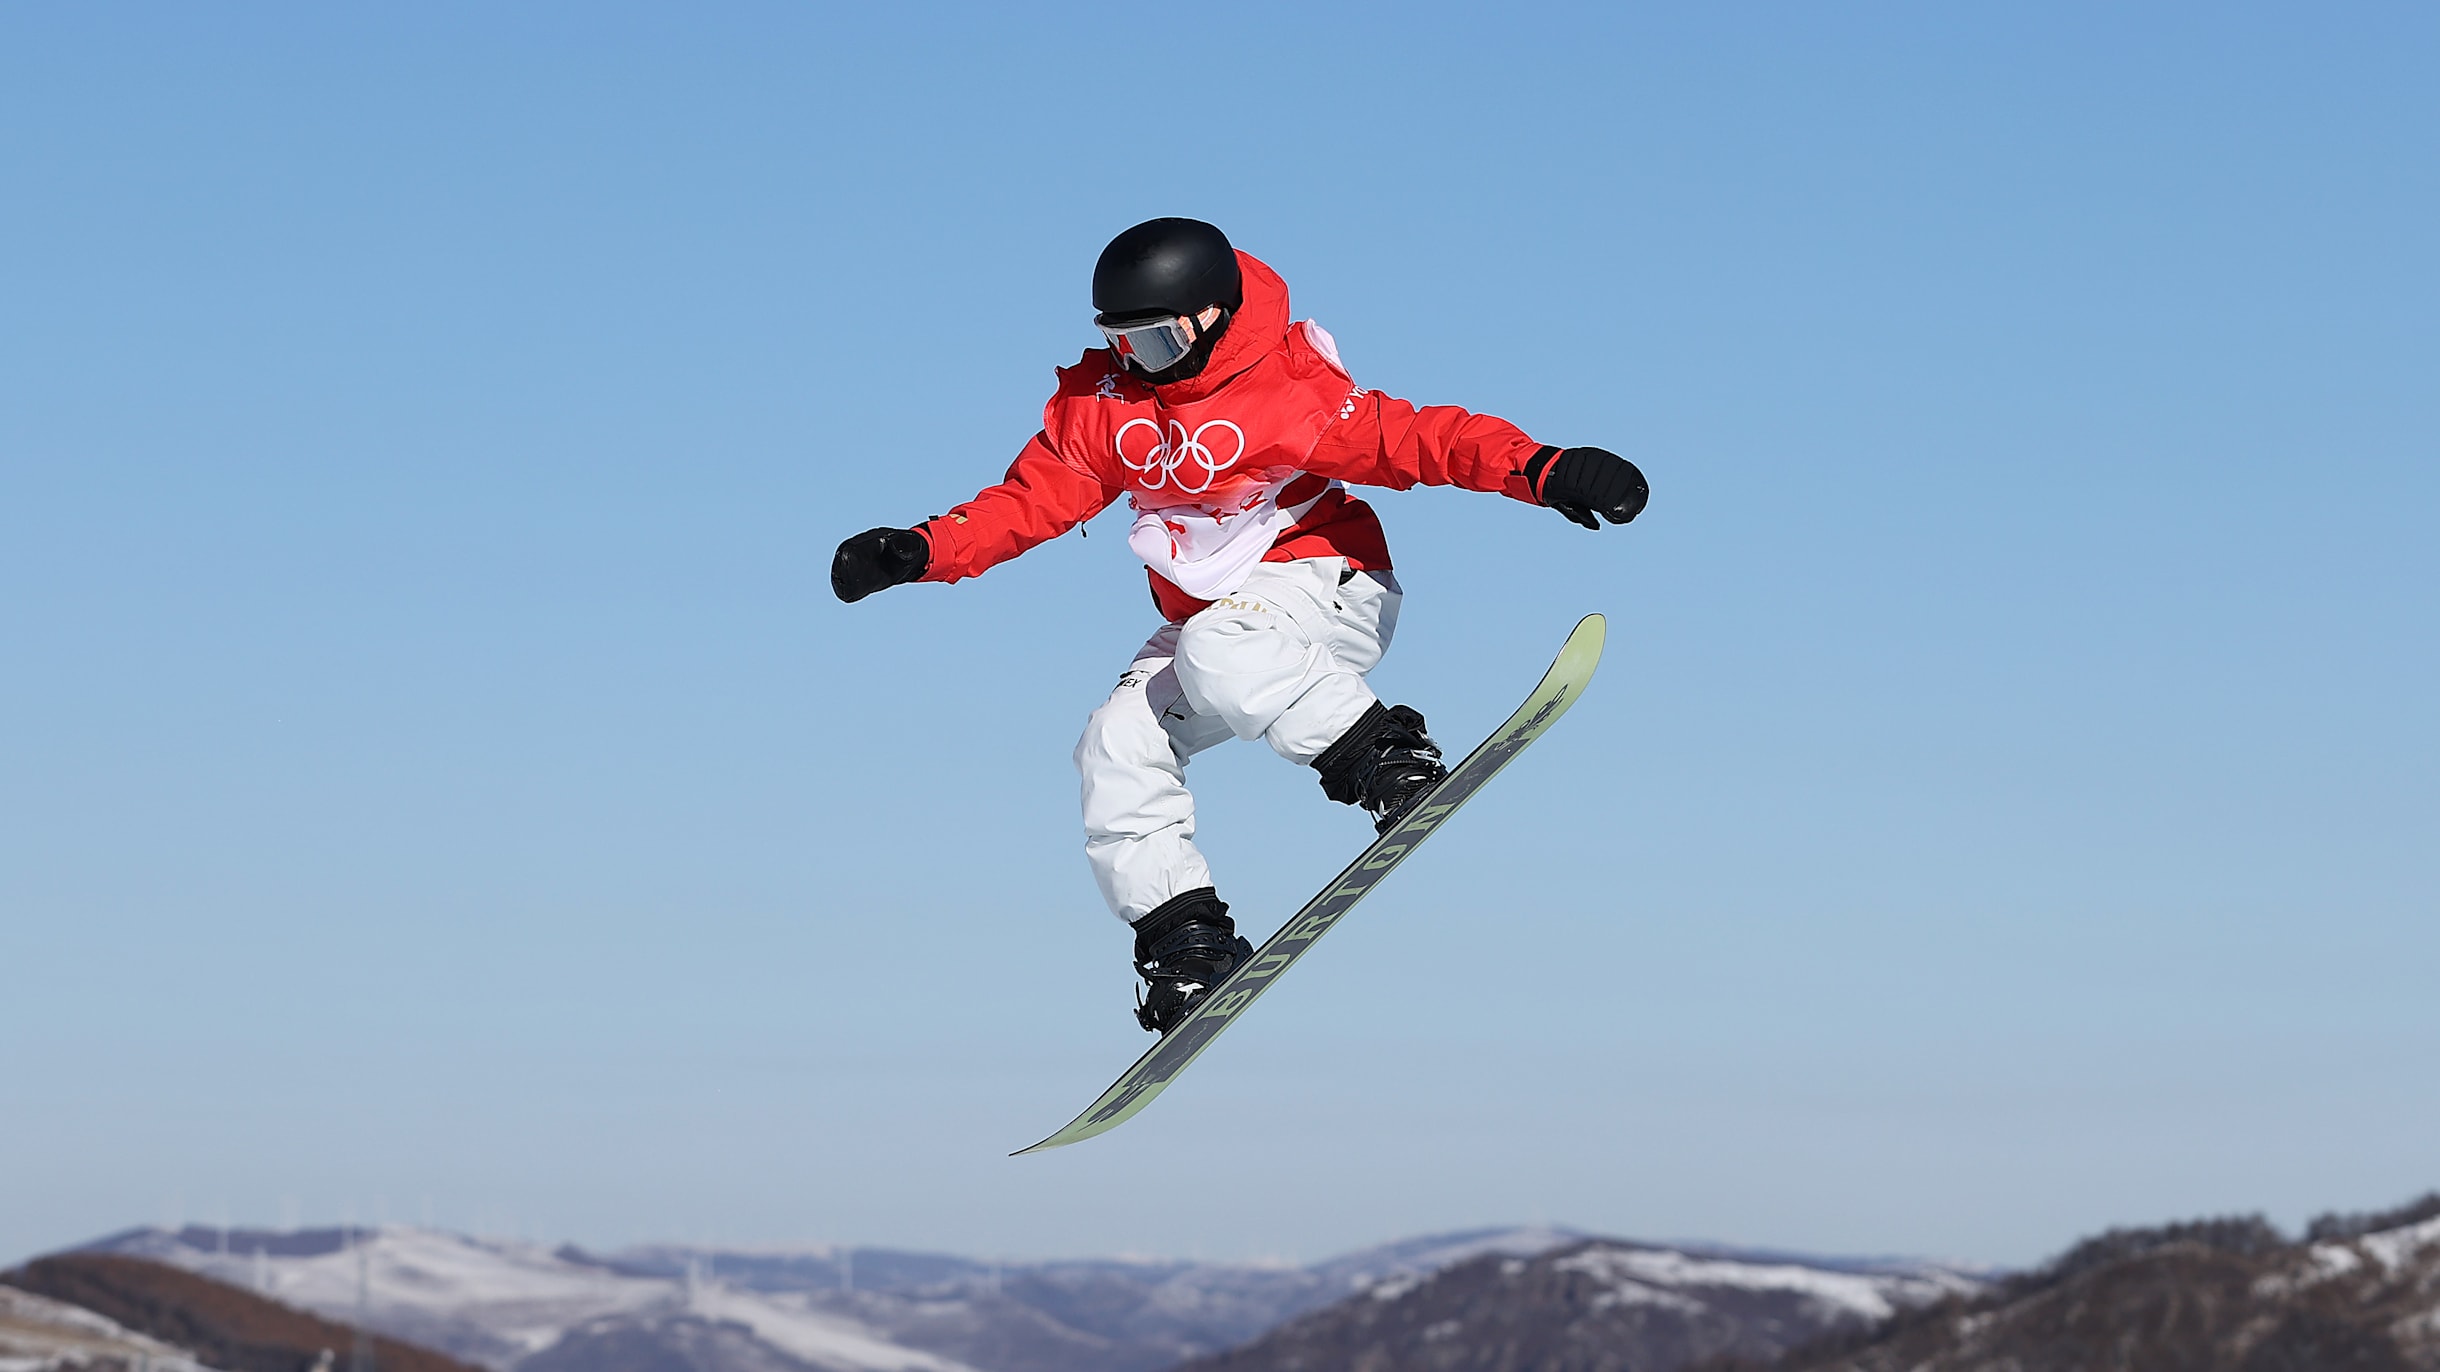 Snowboarding at Beijing 2022 Full schedule and where to watch